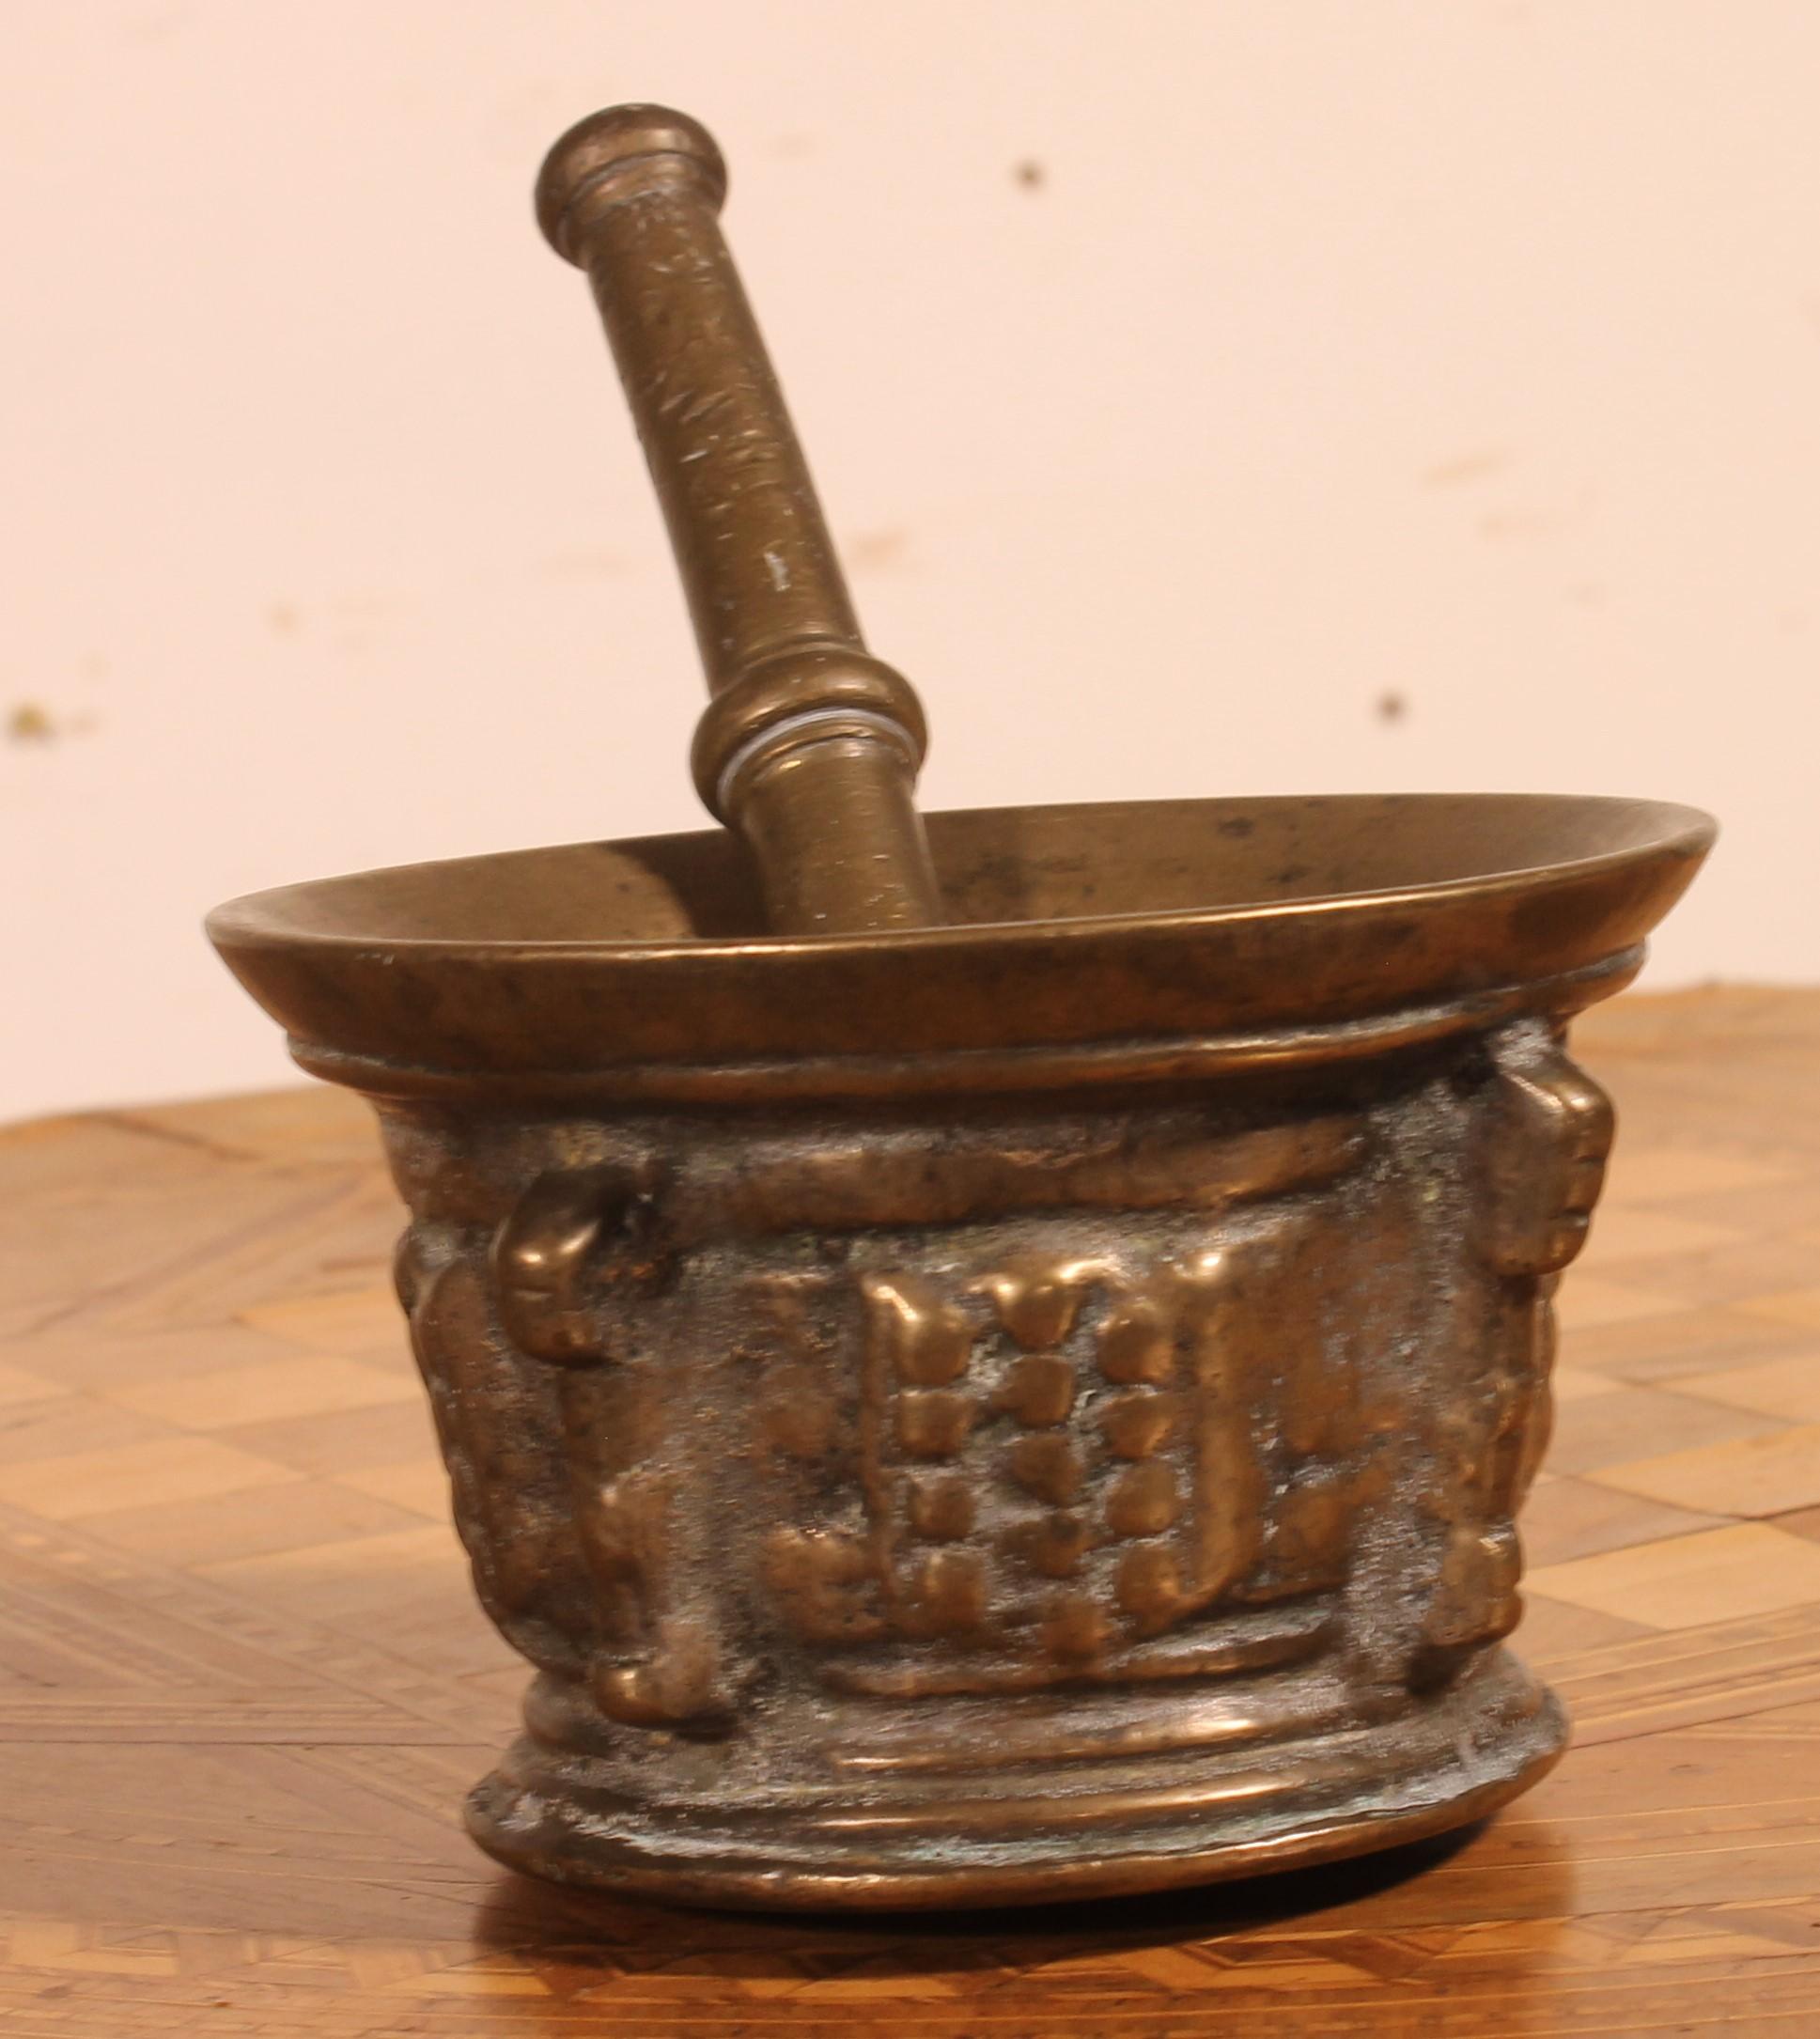 Renaissance Bronze Apothecary Mortar with Its Pestle, 17th Century